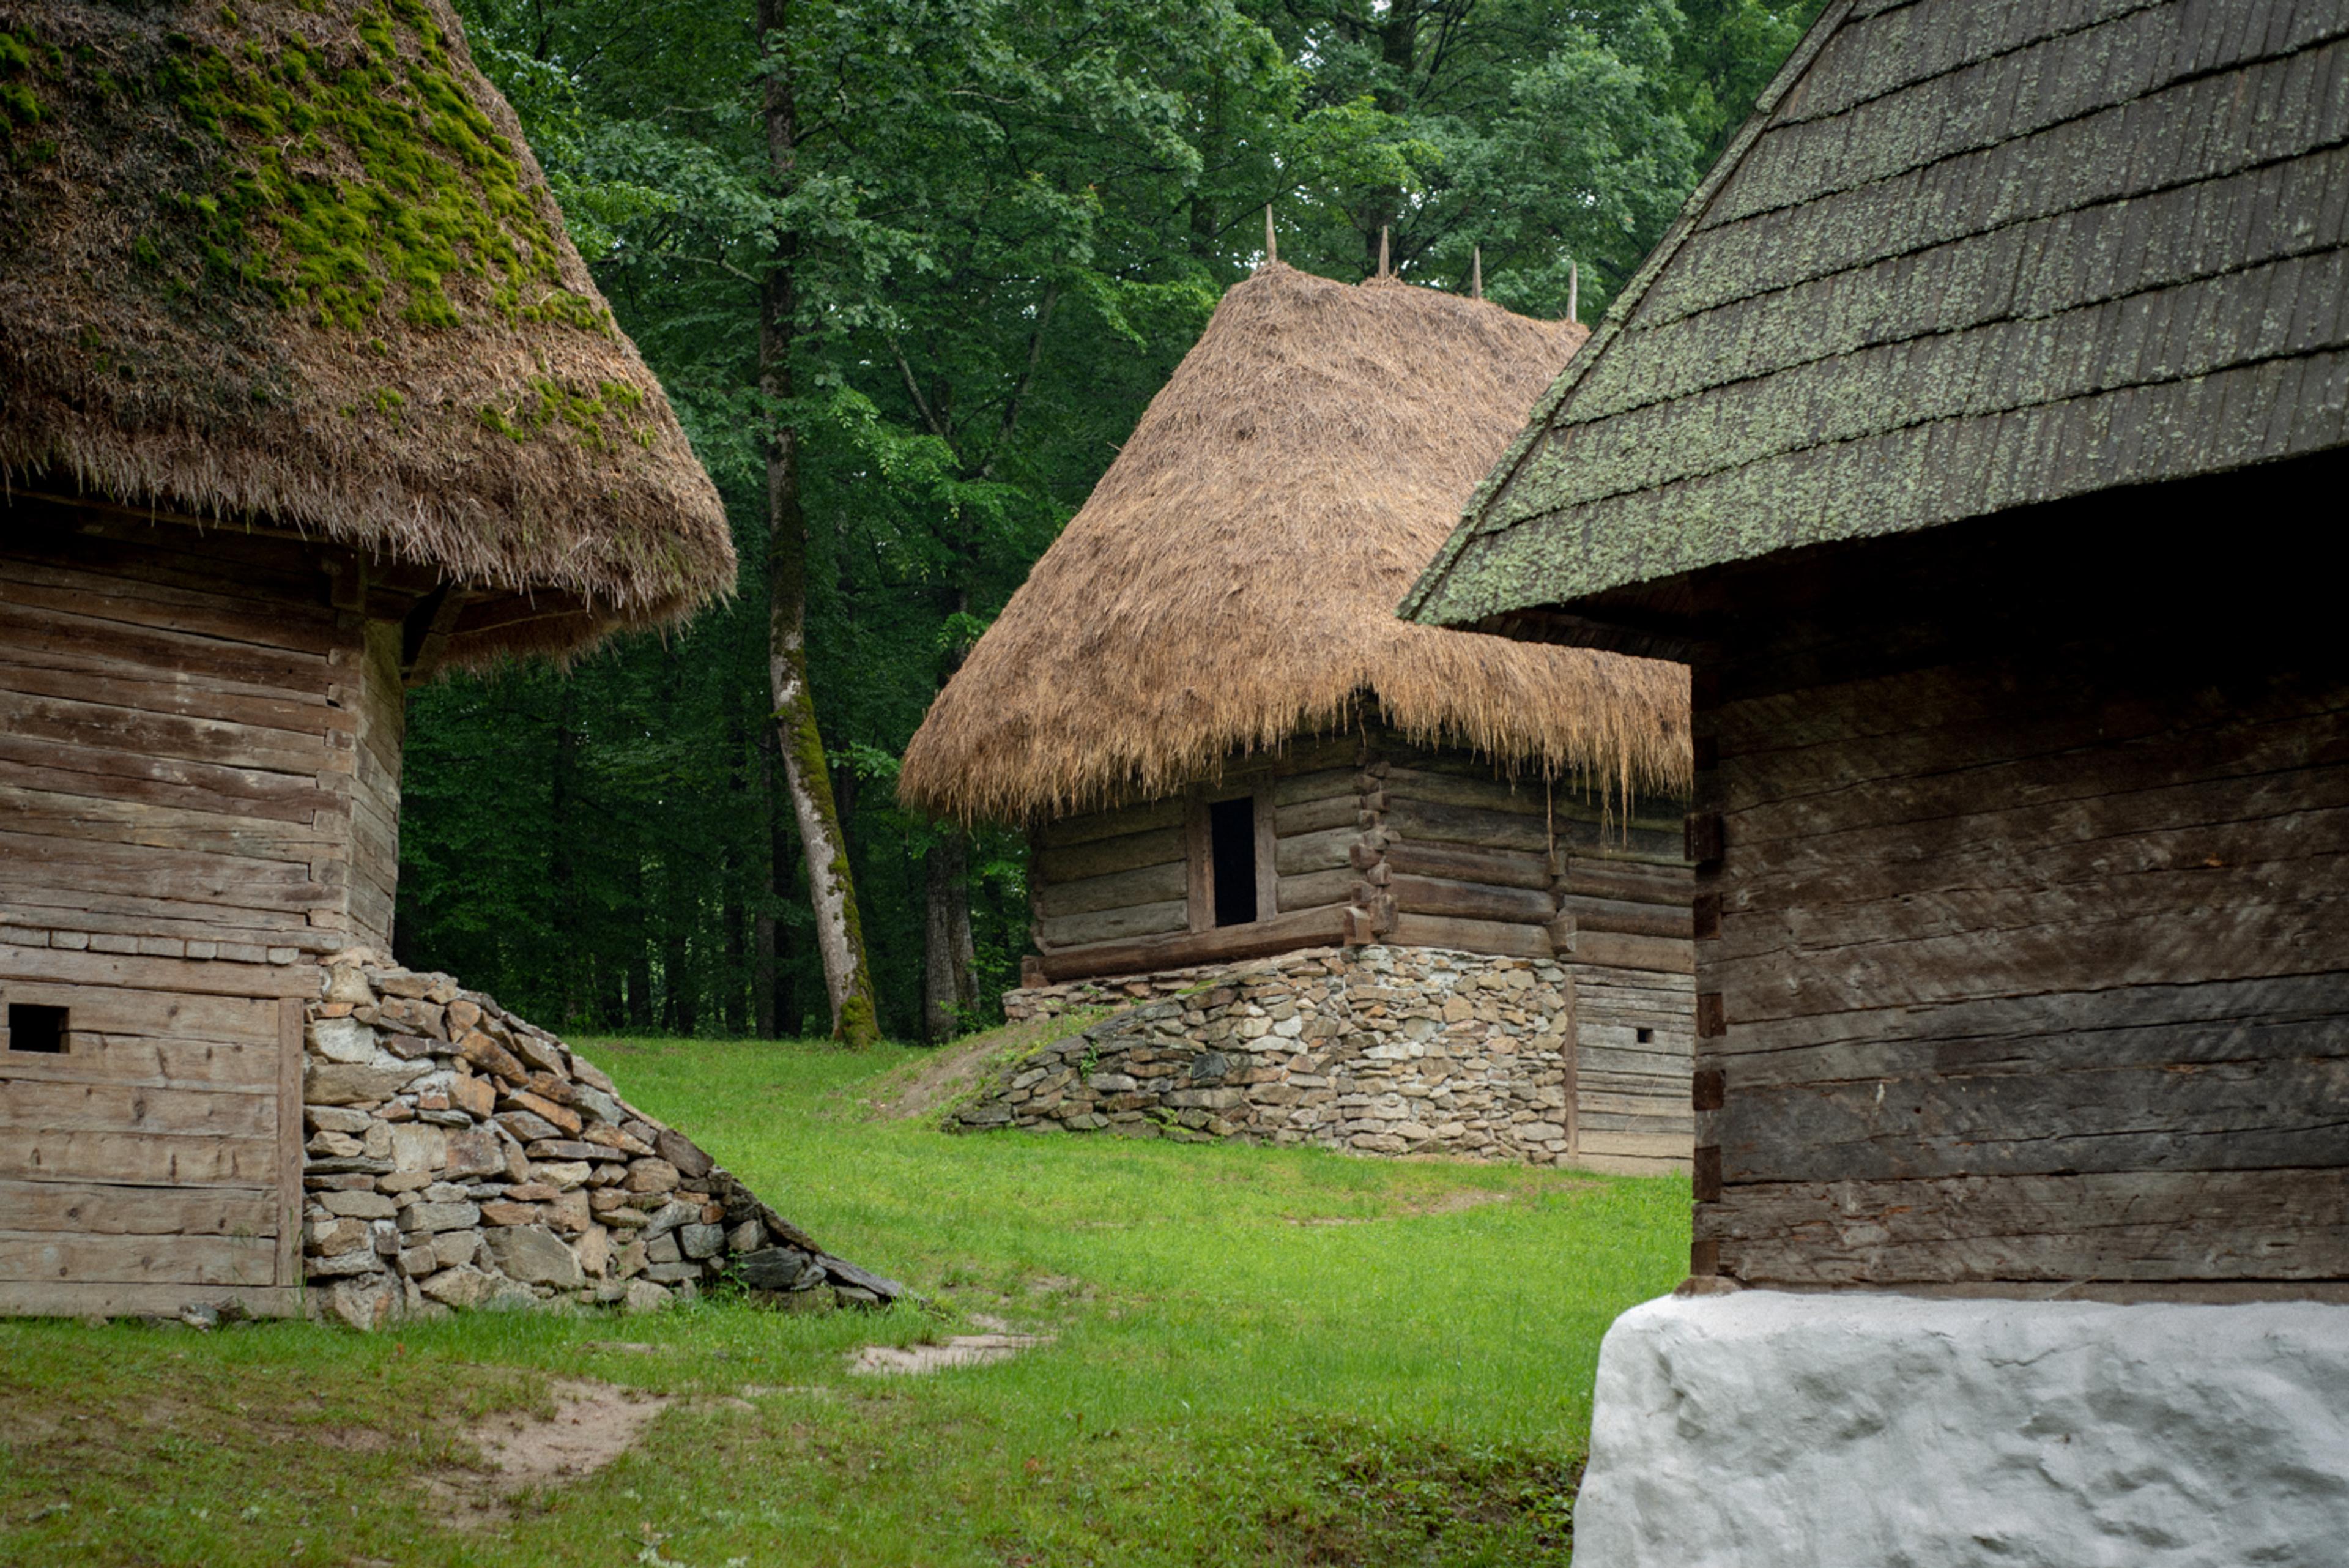 Traditional Romanian country side architecture